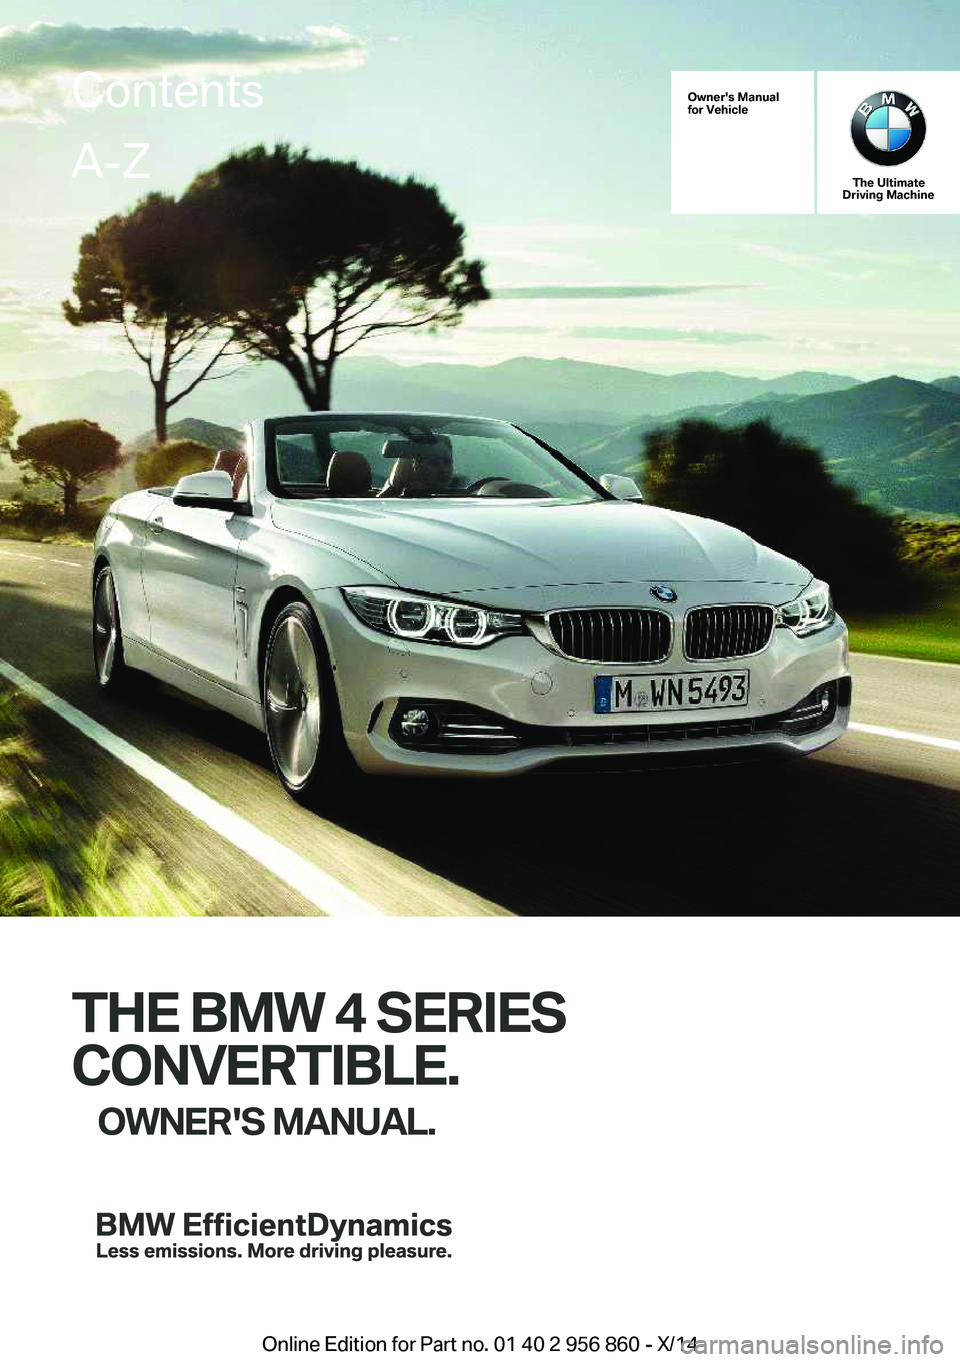 BMW 428I CONVERTIBLE 2014  Owners Manual Owner's Manual
for Vehicle
The Ultimate
Driving Machine
THE BMW 4 SERIES
CONVERTIBLE. OWNER'S MANUAL.
ContentsA-Z
Online Edition for Part no. 01 40 2 956 860 - X/14   